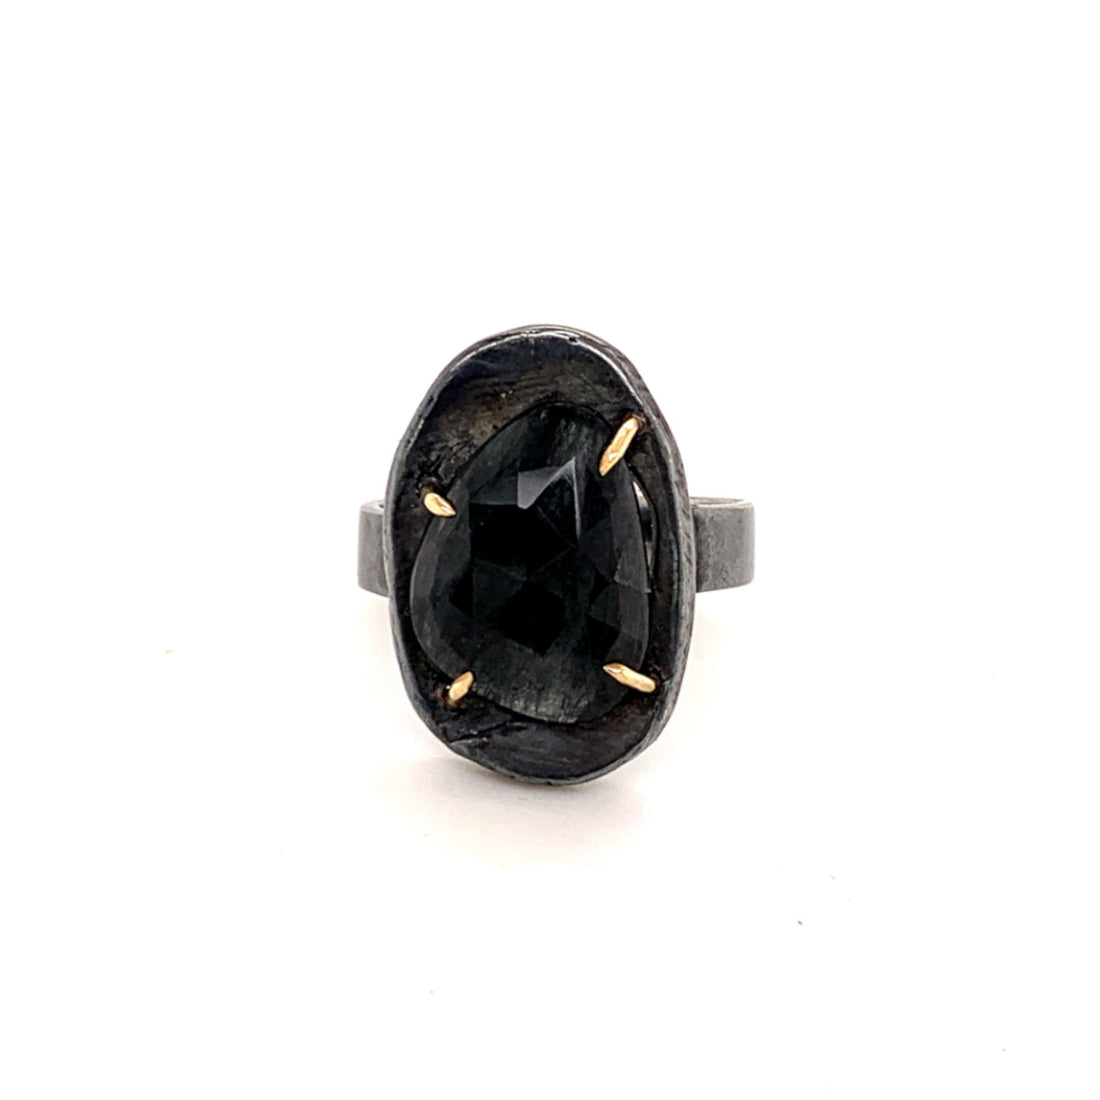 The semi precious gemstones in our collection are carefully chosen for their unique color and energy. The rose cut facets of these semi precious stones create more reflection, enhancing the beauty and radiance of the stone. This ring features Black Tourmalinated Quartz known for their double healing properties of cleansing, grounding. and clearing energy.